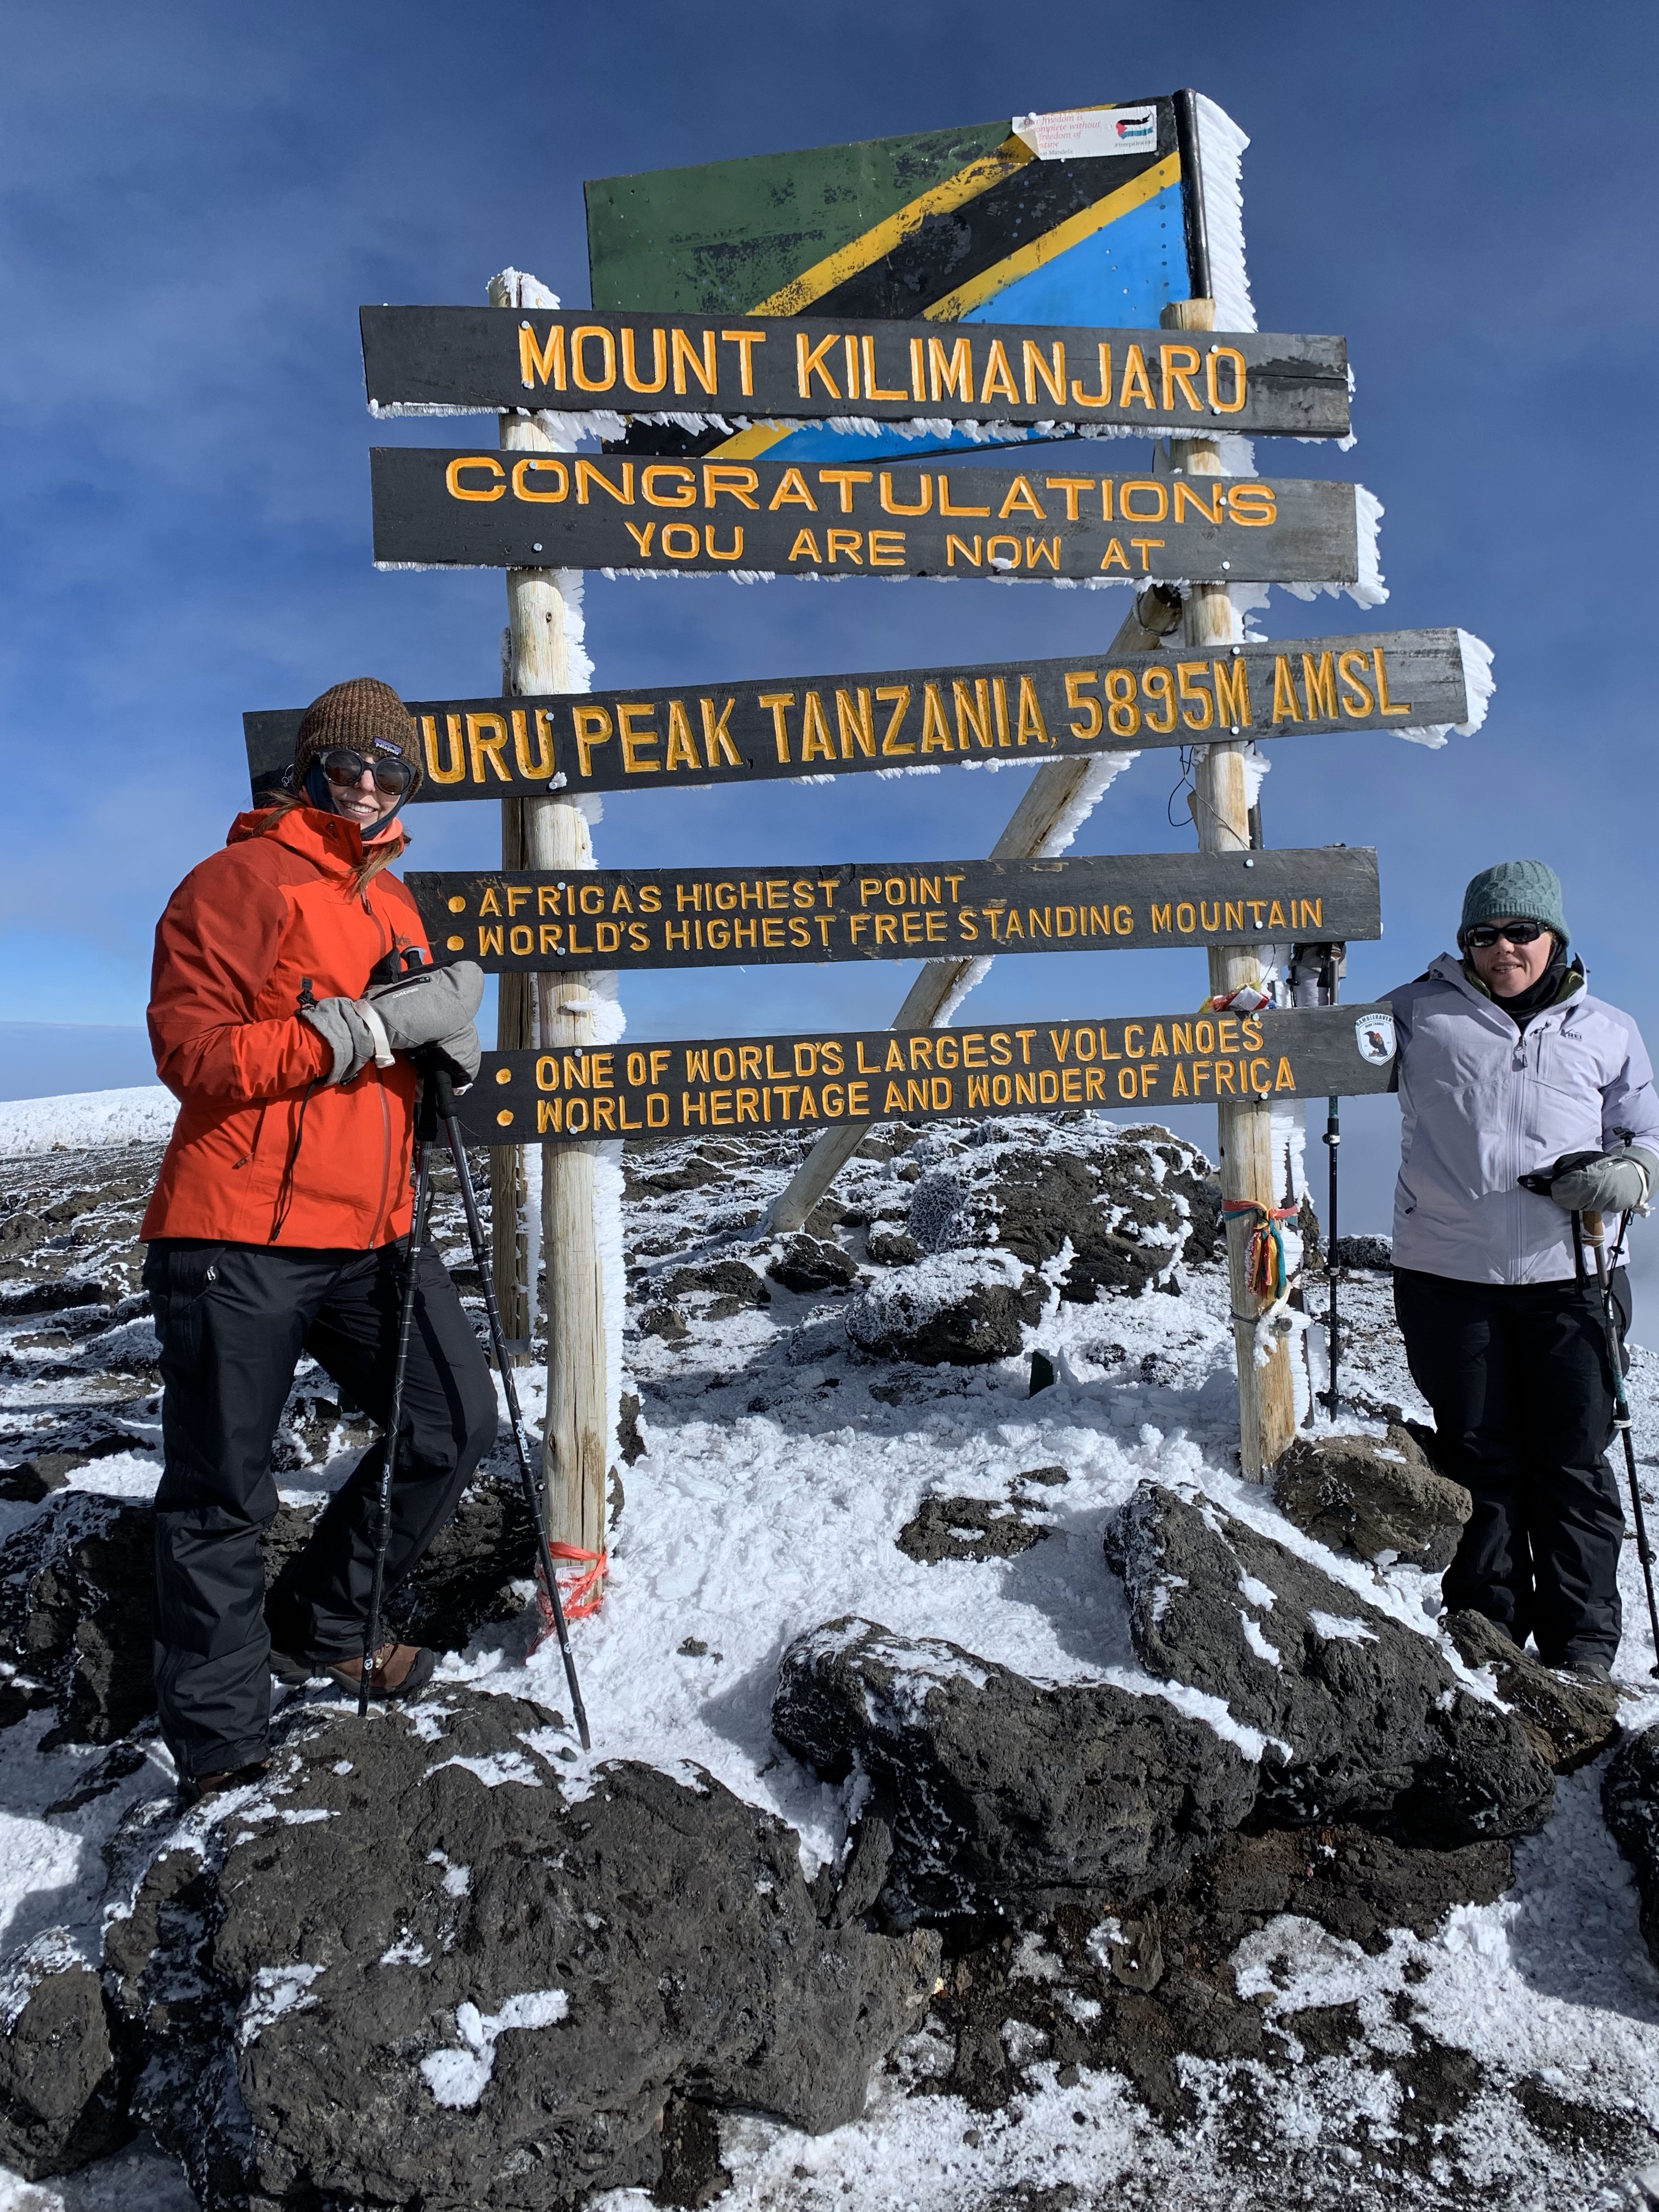 Ms. Irving climbed to the top of Mount Kilimanjaro, Africa’s highest peak.